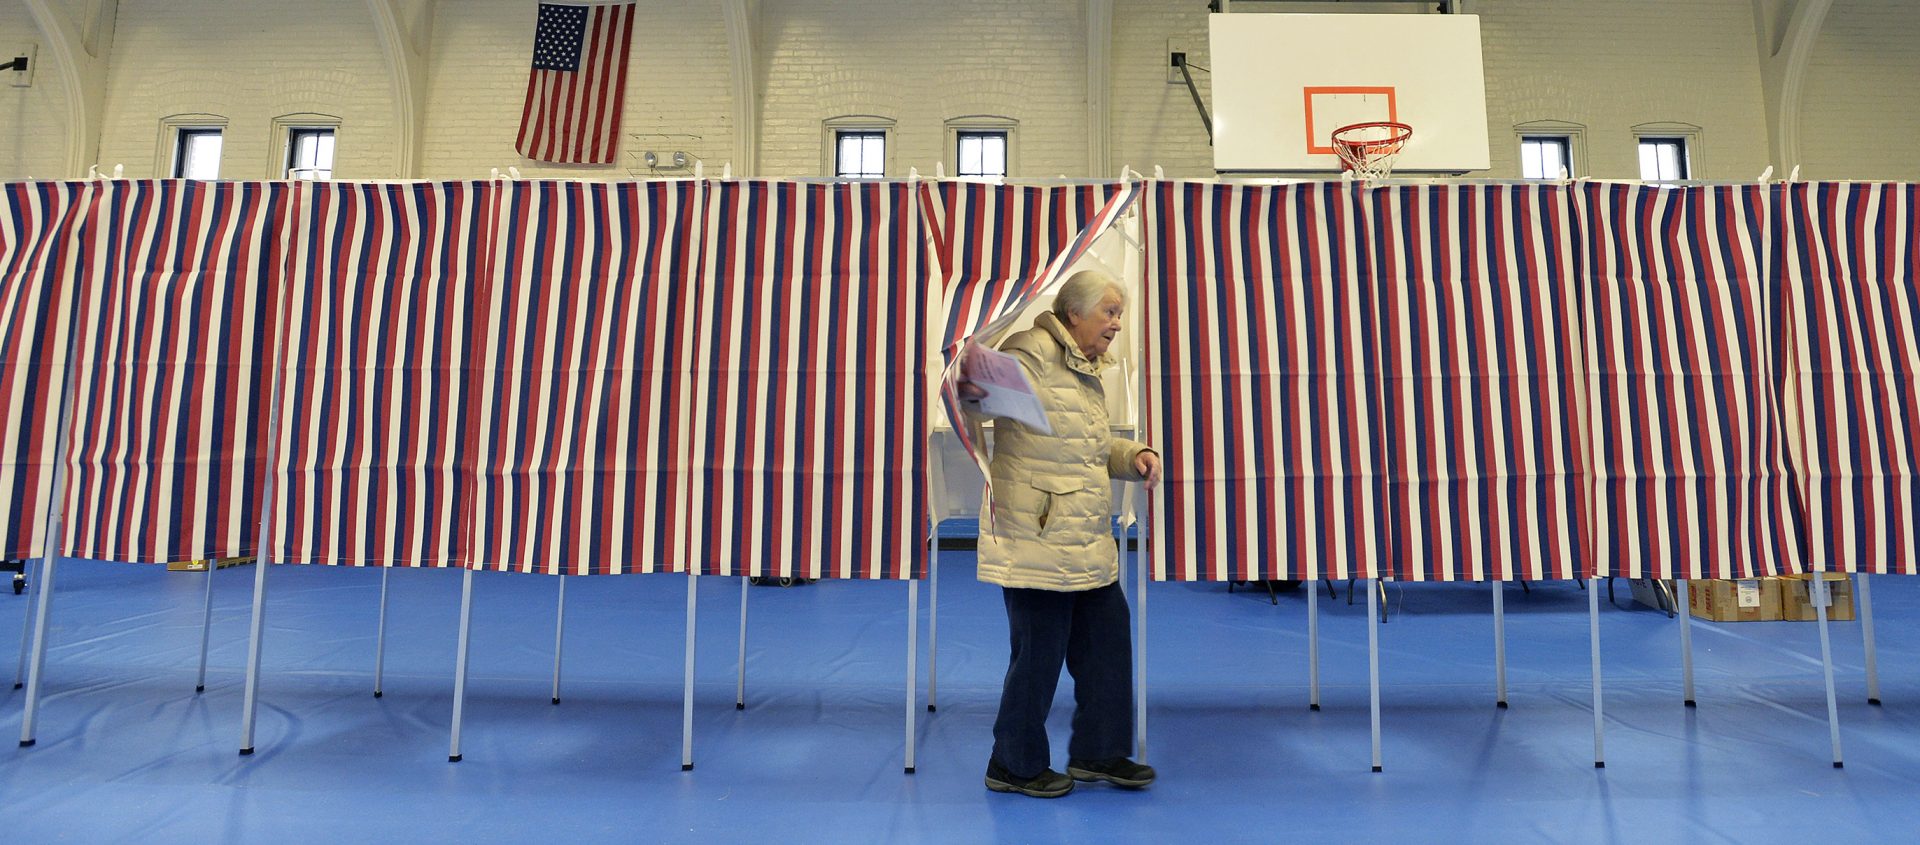 A voter leaves a polling booth at the Ward Five Community Center during the New Hampshire primary in Concord, N.H. on Tuesday. New Hampshire has served to reinforce or reset the Democratic primary race over the past five decades.